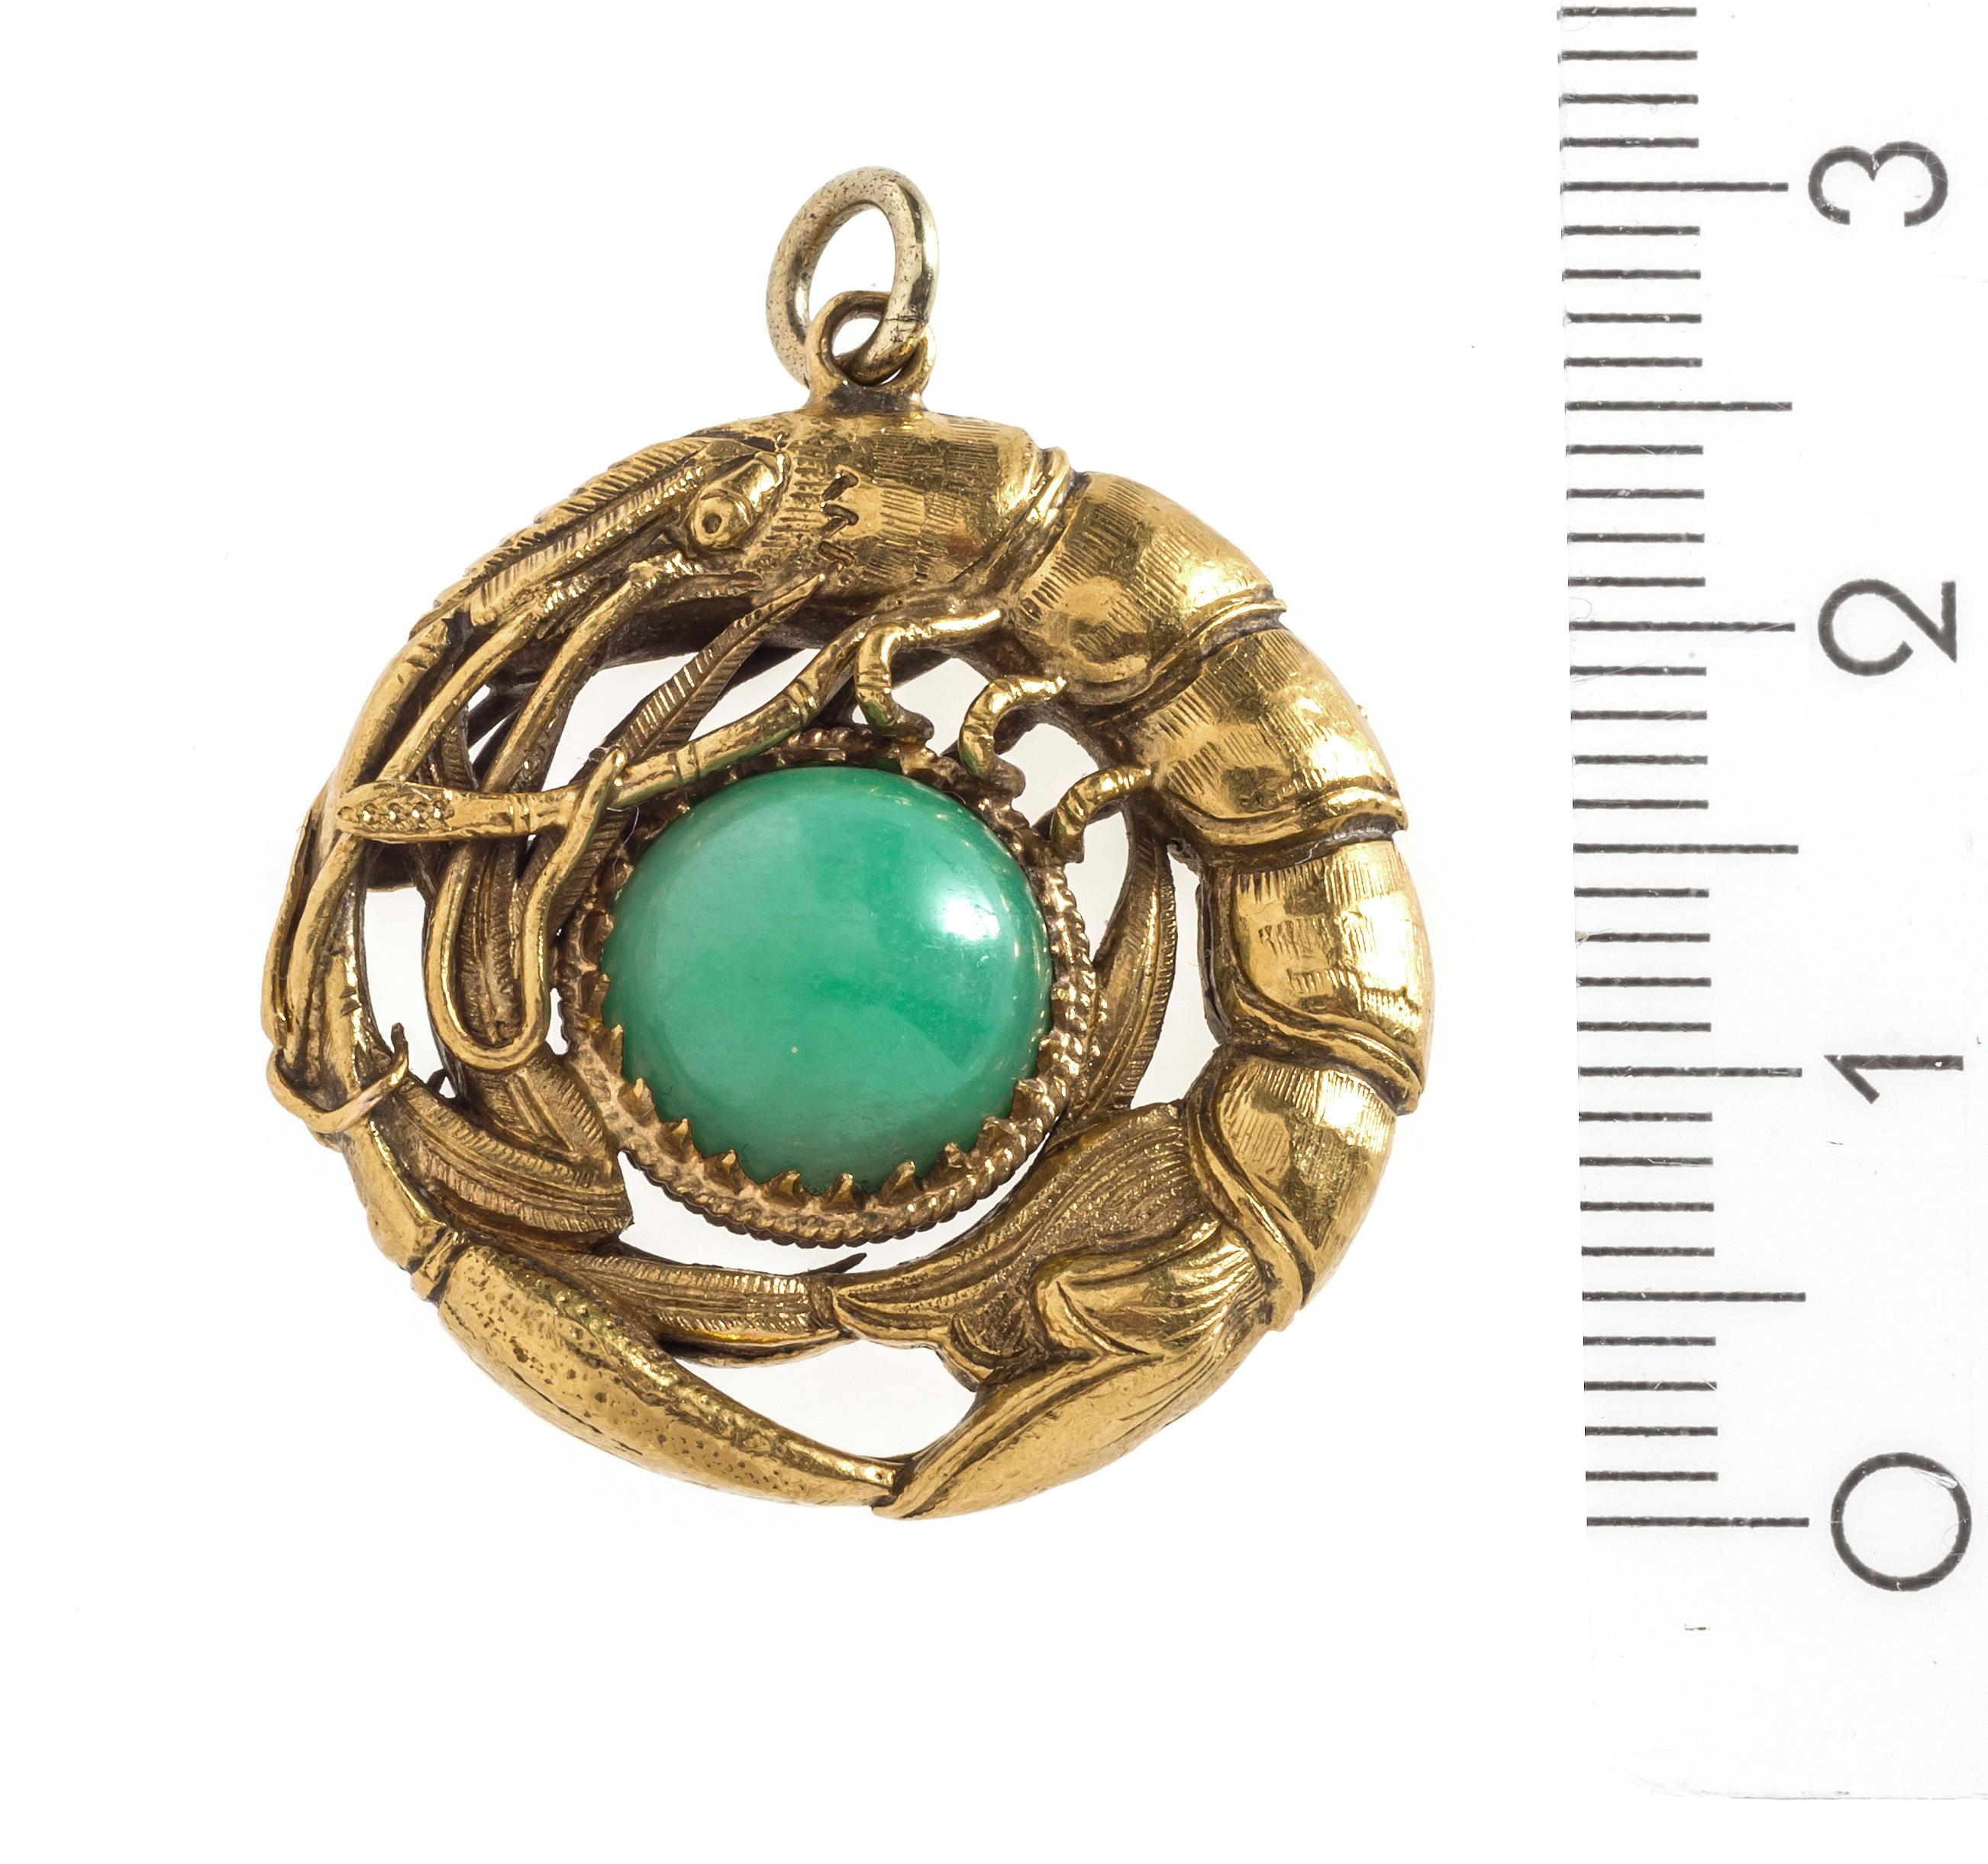 Highly unusual naturalistic modelled shrimp in 18K gold holding a round jade bead in its center. The shrimp is finely chiselled and engraved. The necklace is most likely an American work from the period of 1890-1900. 

The necklace chain (14K gold)